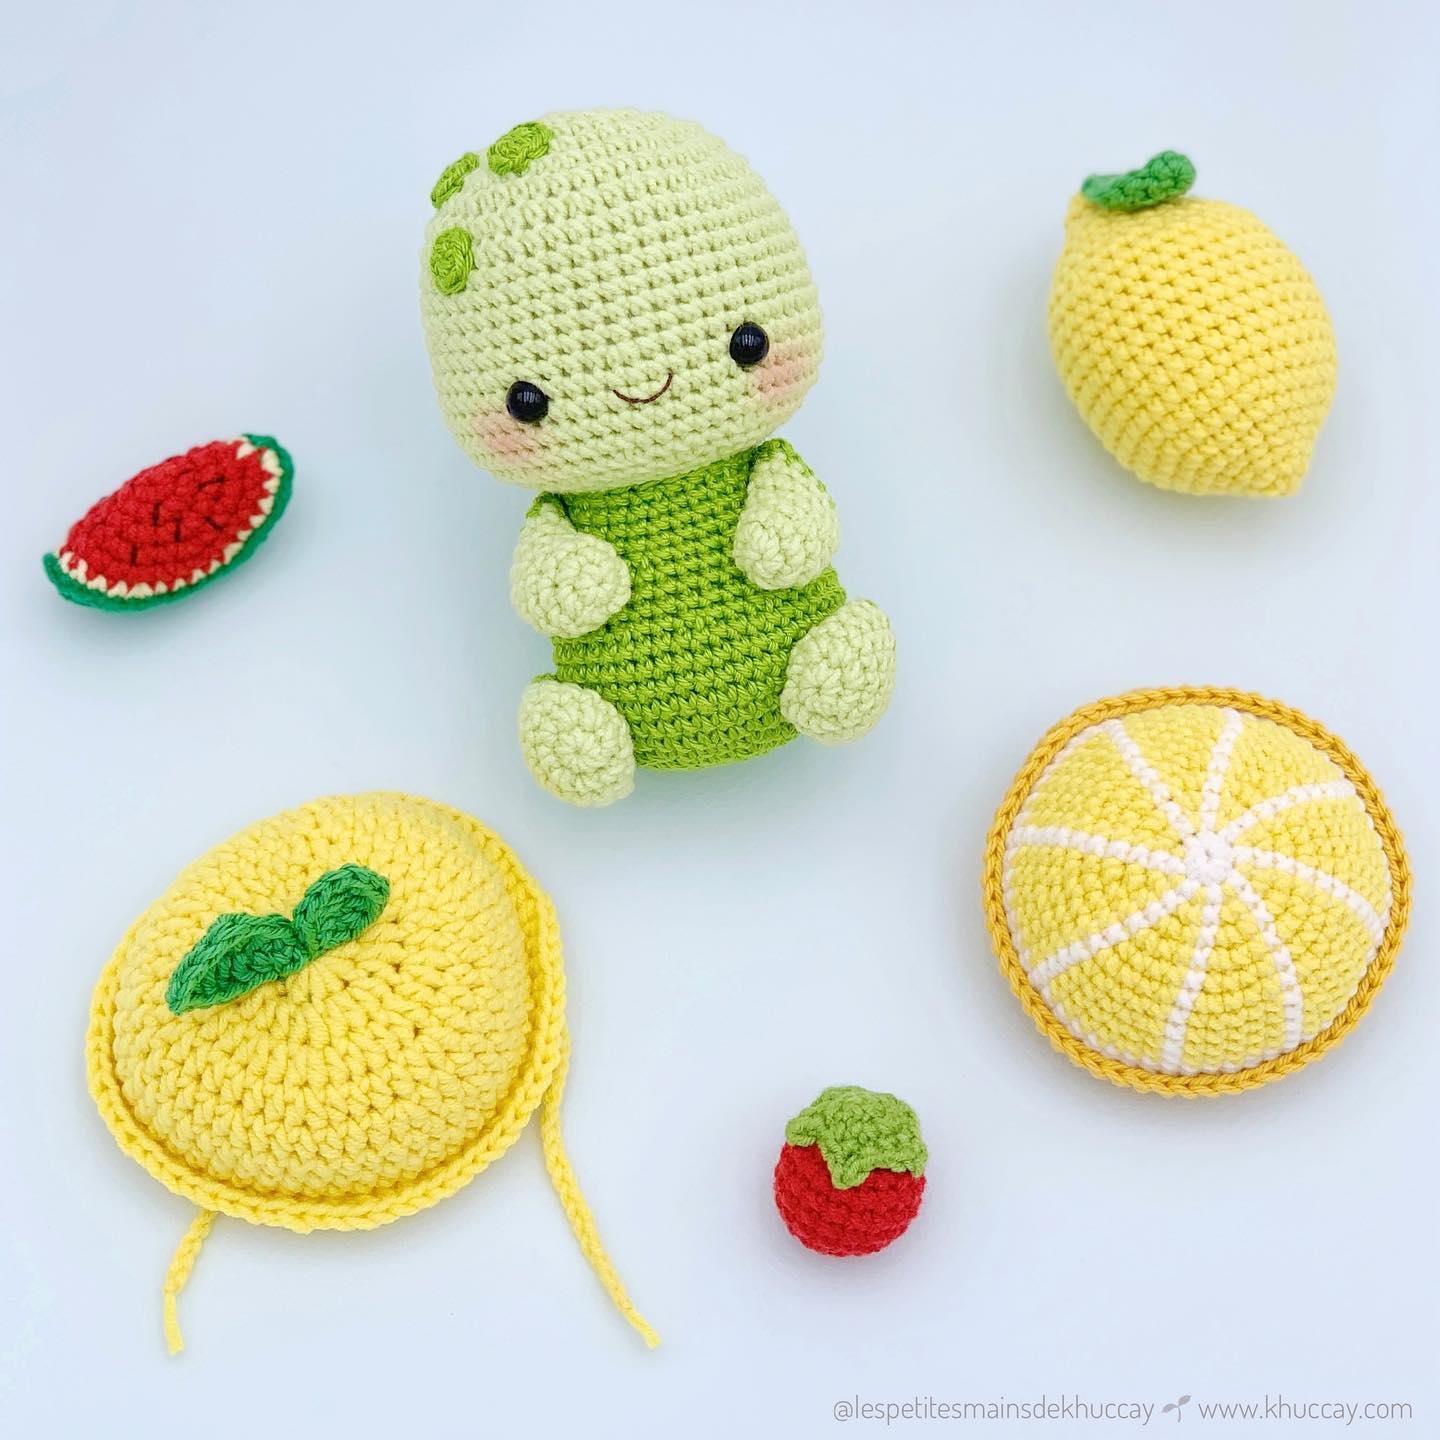 Summer vibes 🍋
I’d love to make the carapace of Théo turtle in all type of fruits 😋